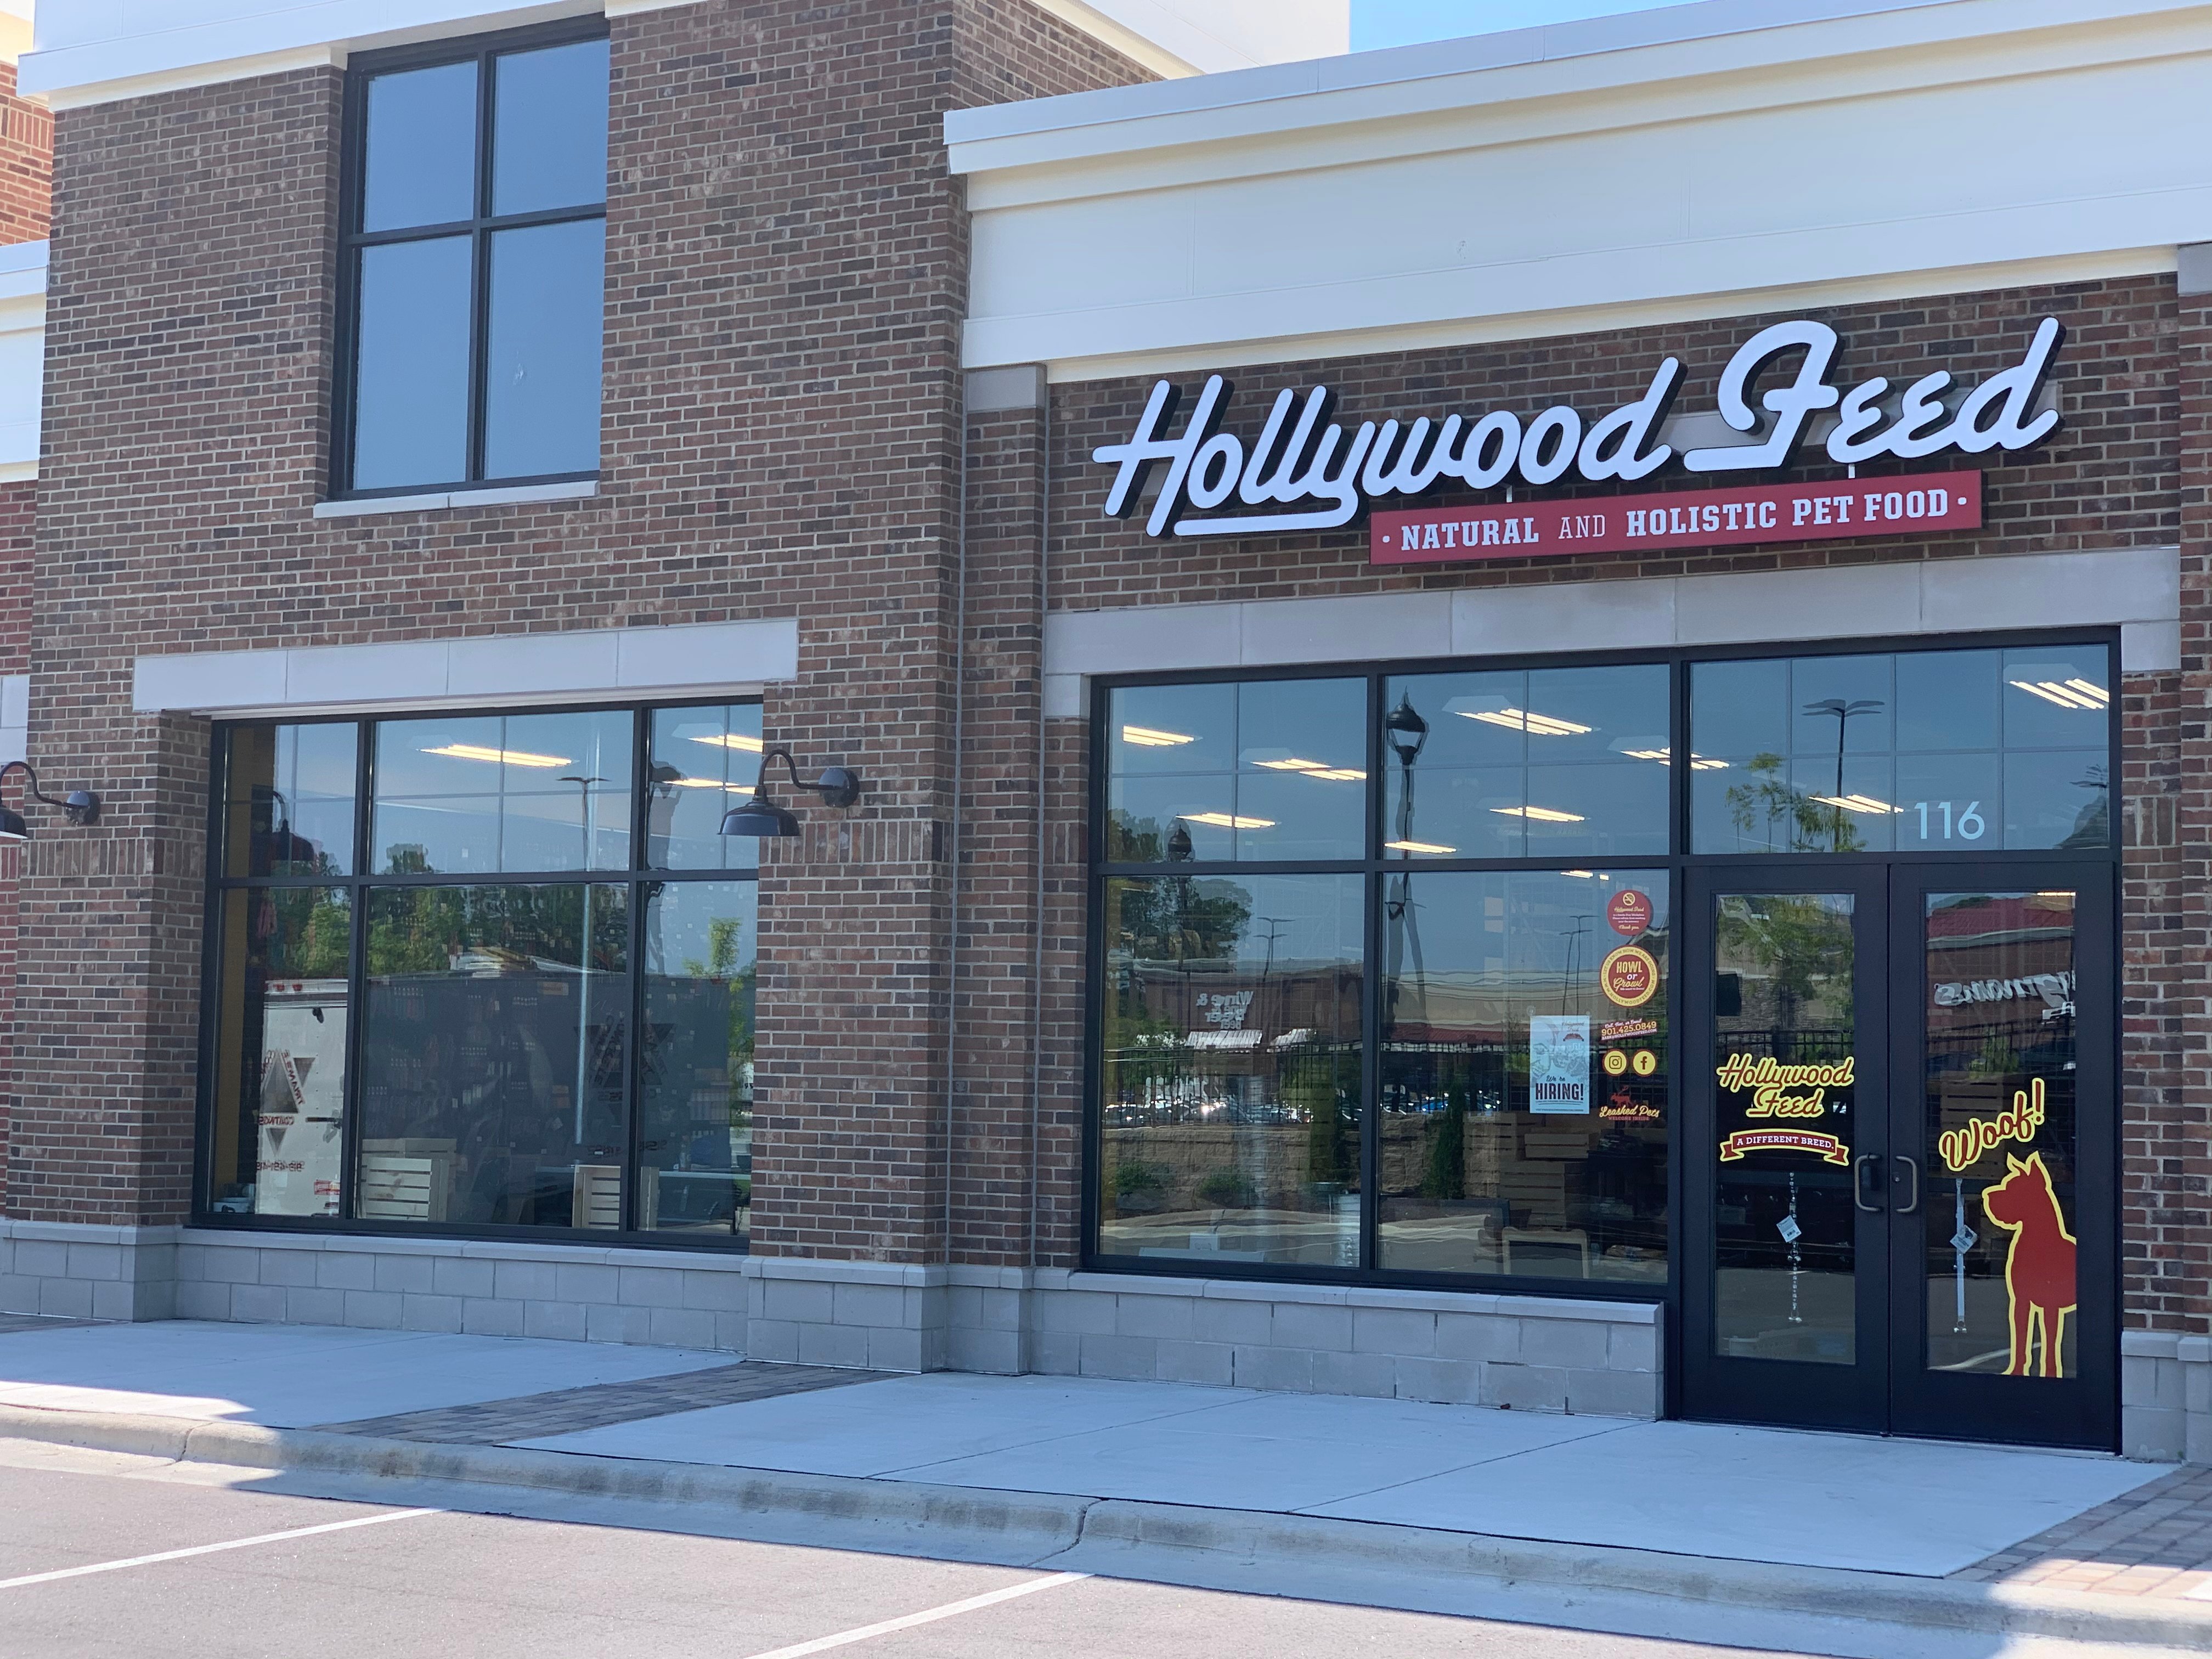 Hollywood Feed Twin Lakes: {KEYWORDS} in Morrisville, NC